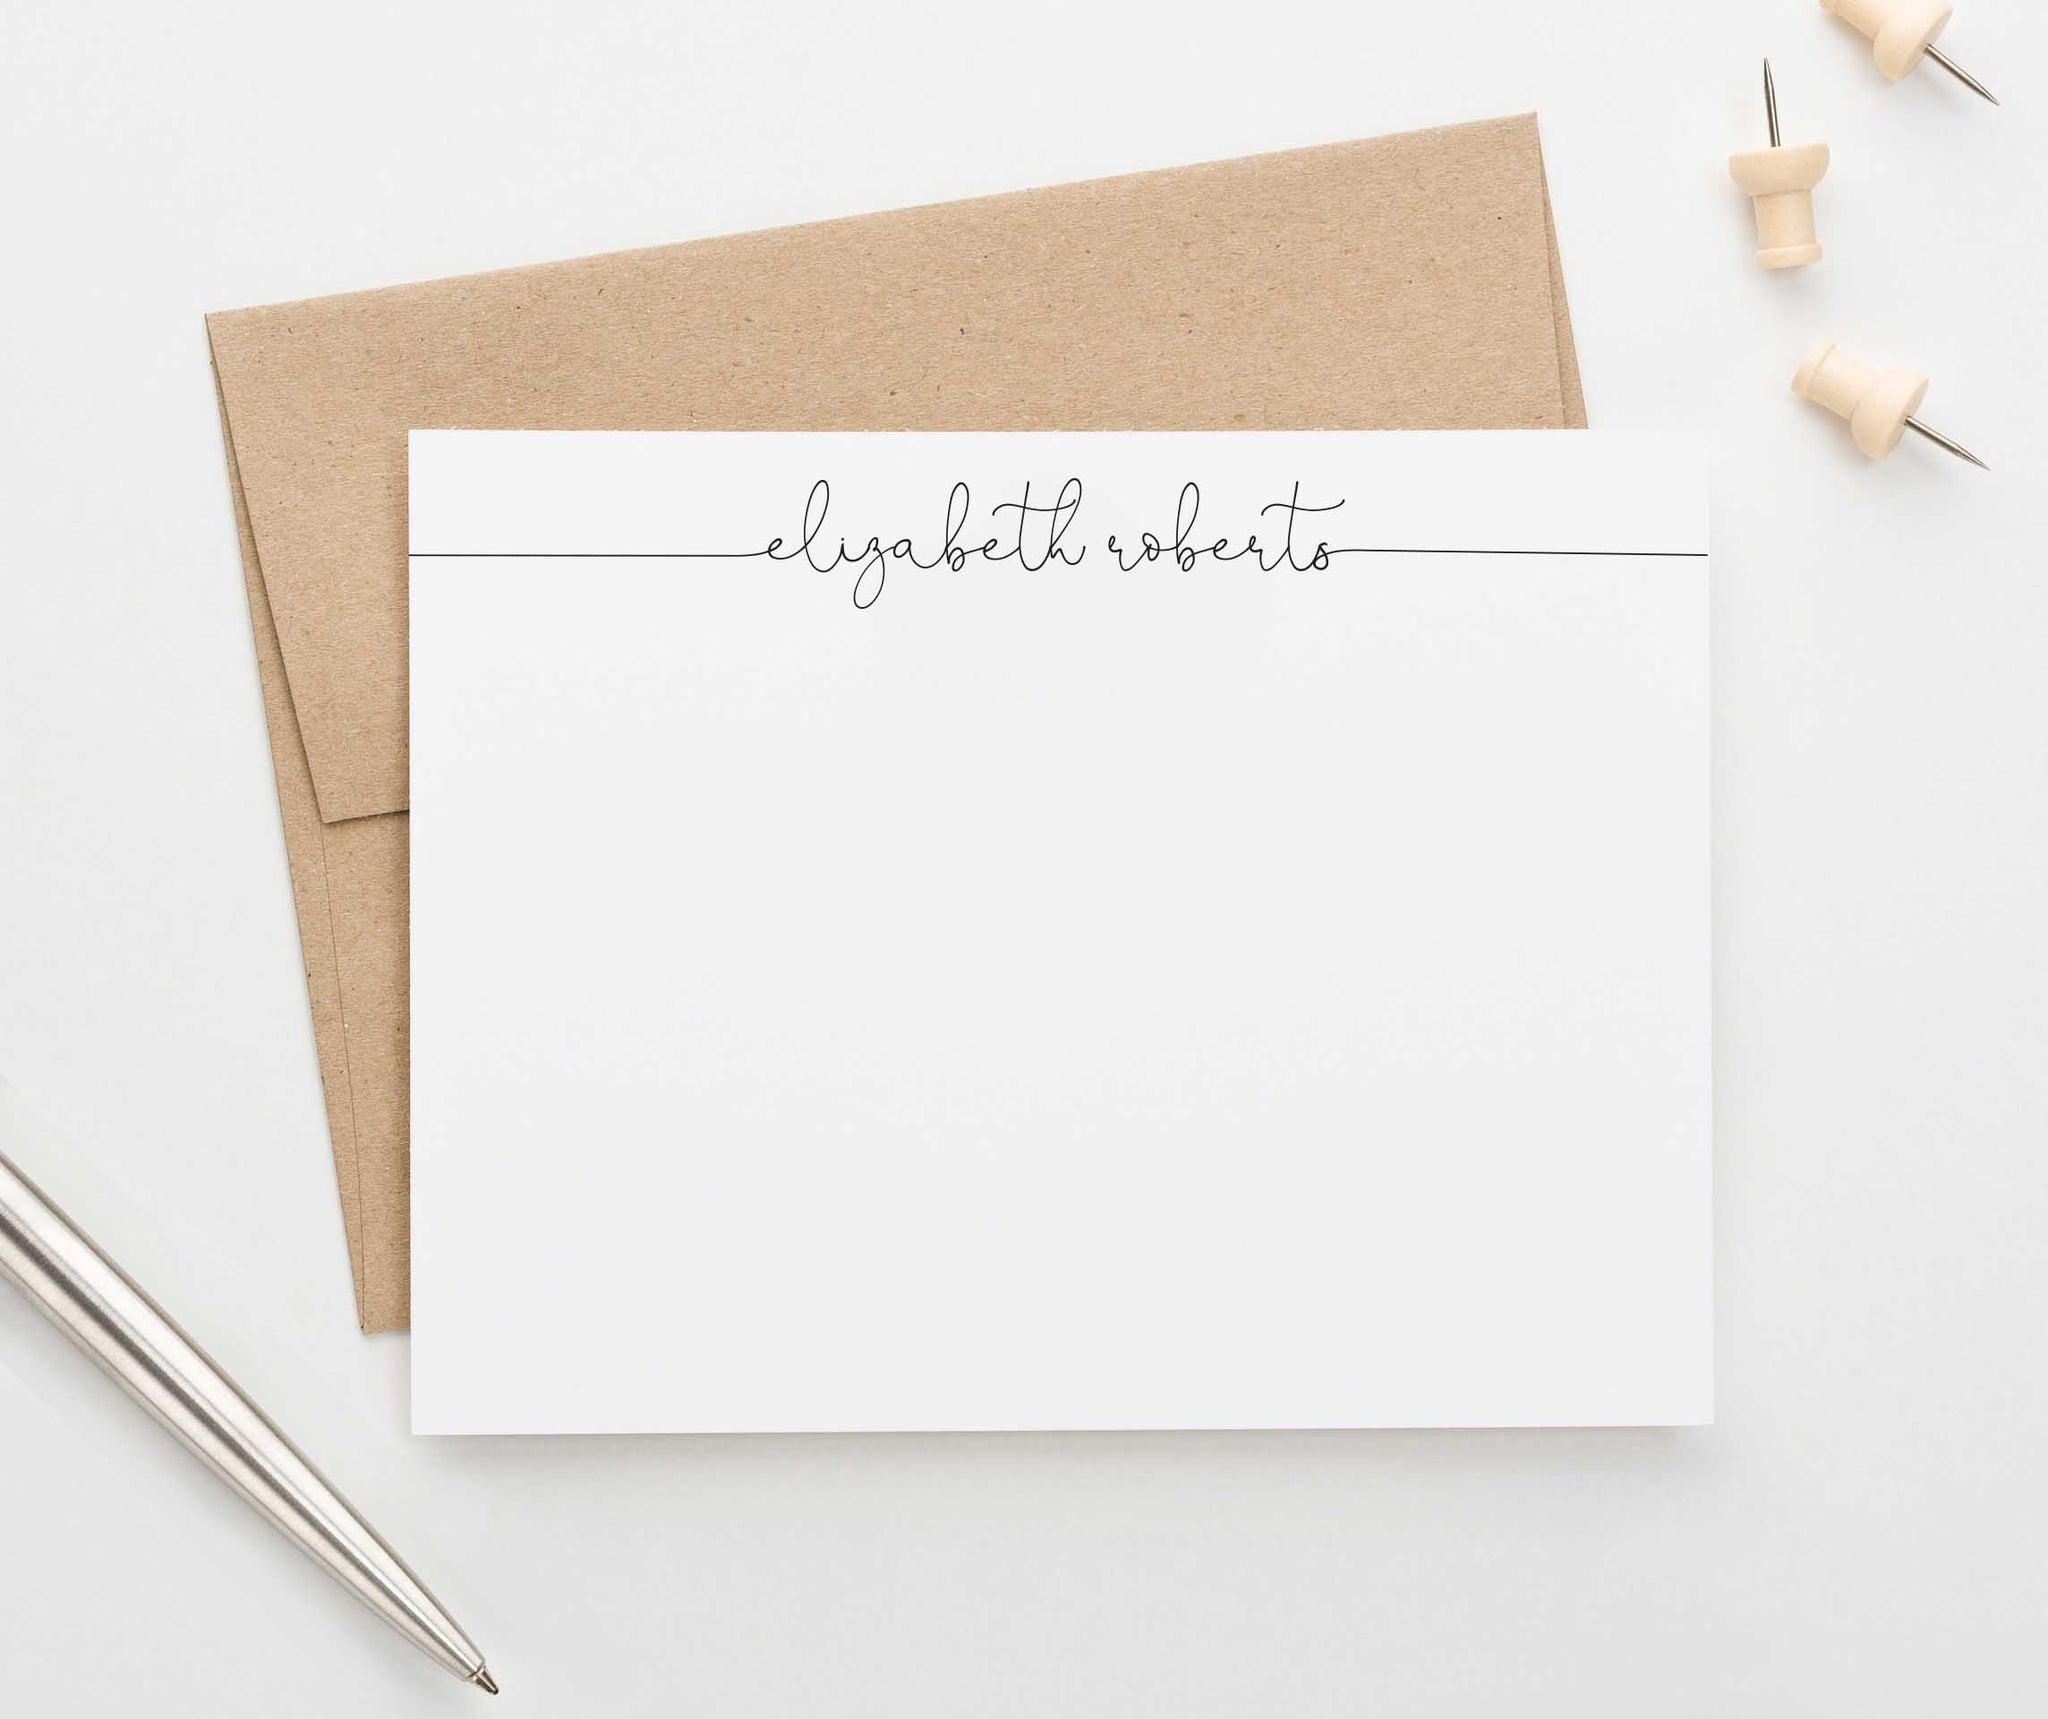  Personalized Stationery Note Cards and Envelopes Set for Women  Customized with Name in Script Font, Choose Ink & Envelope Colors